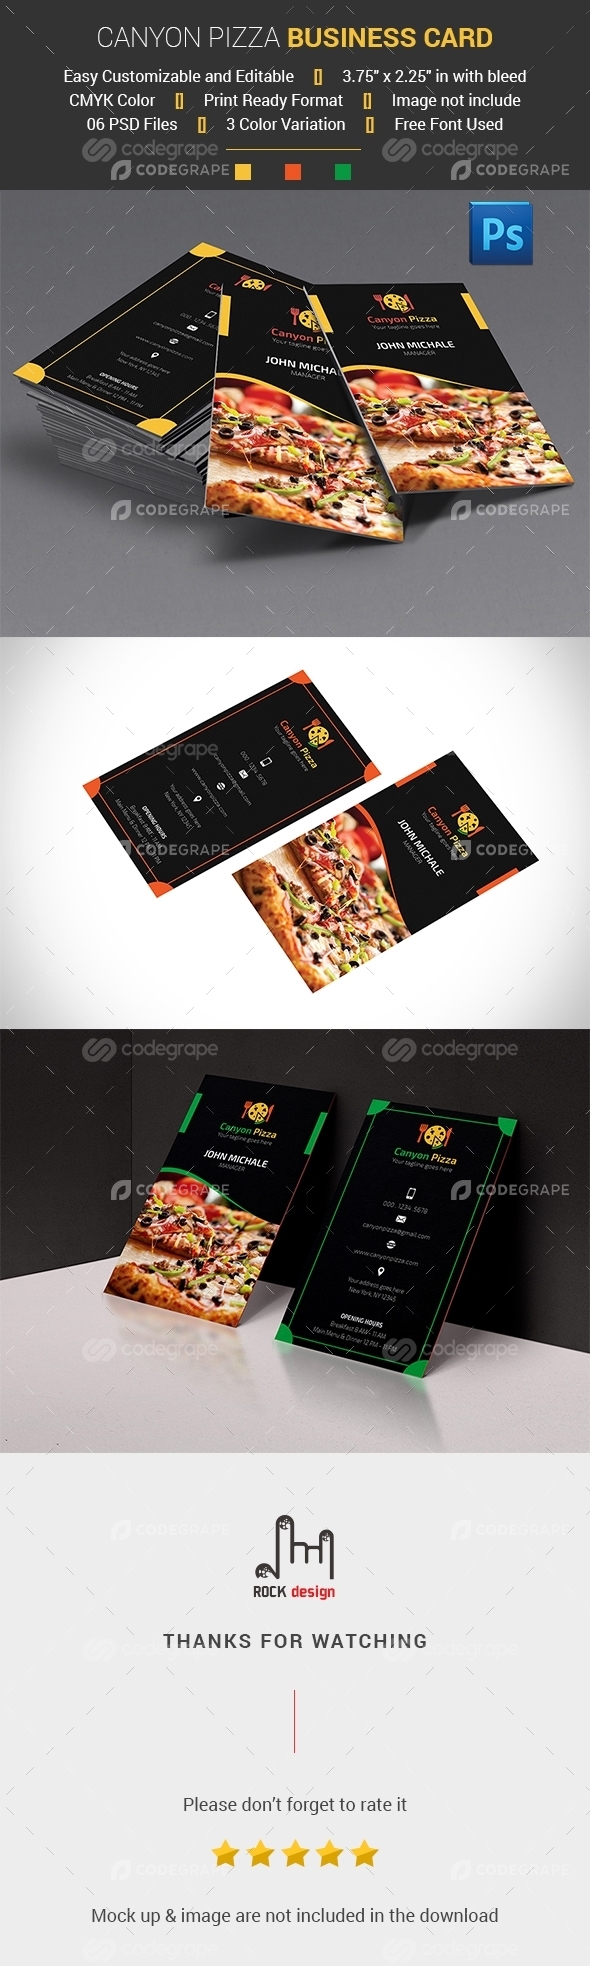 Canyon Pizza Vertical Business Card